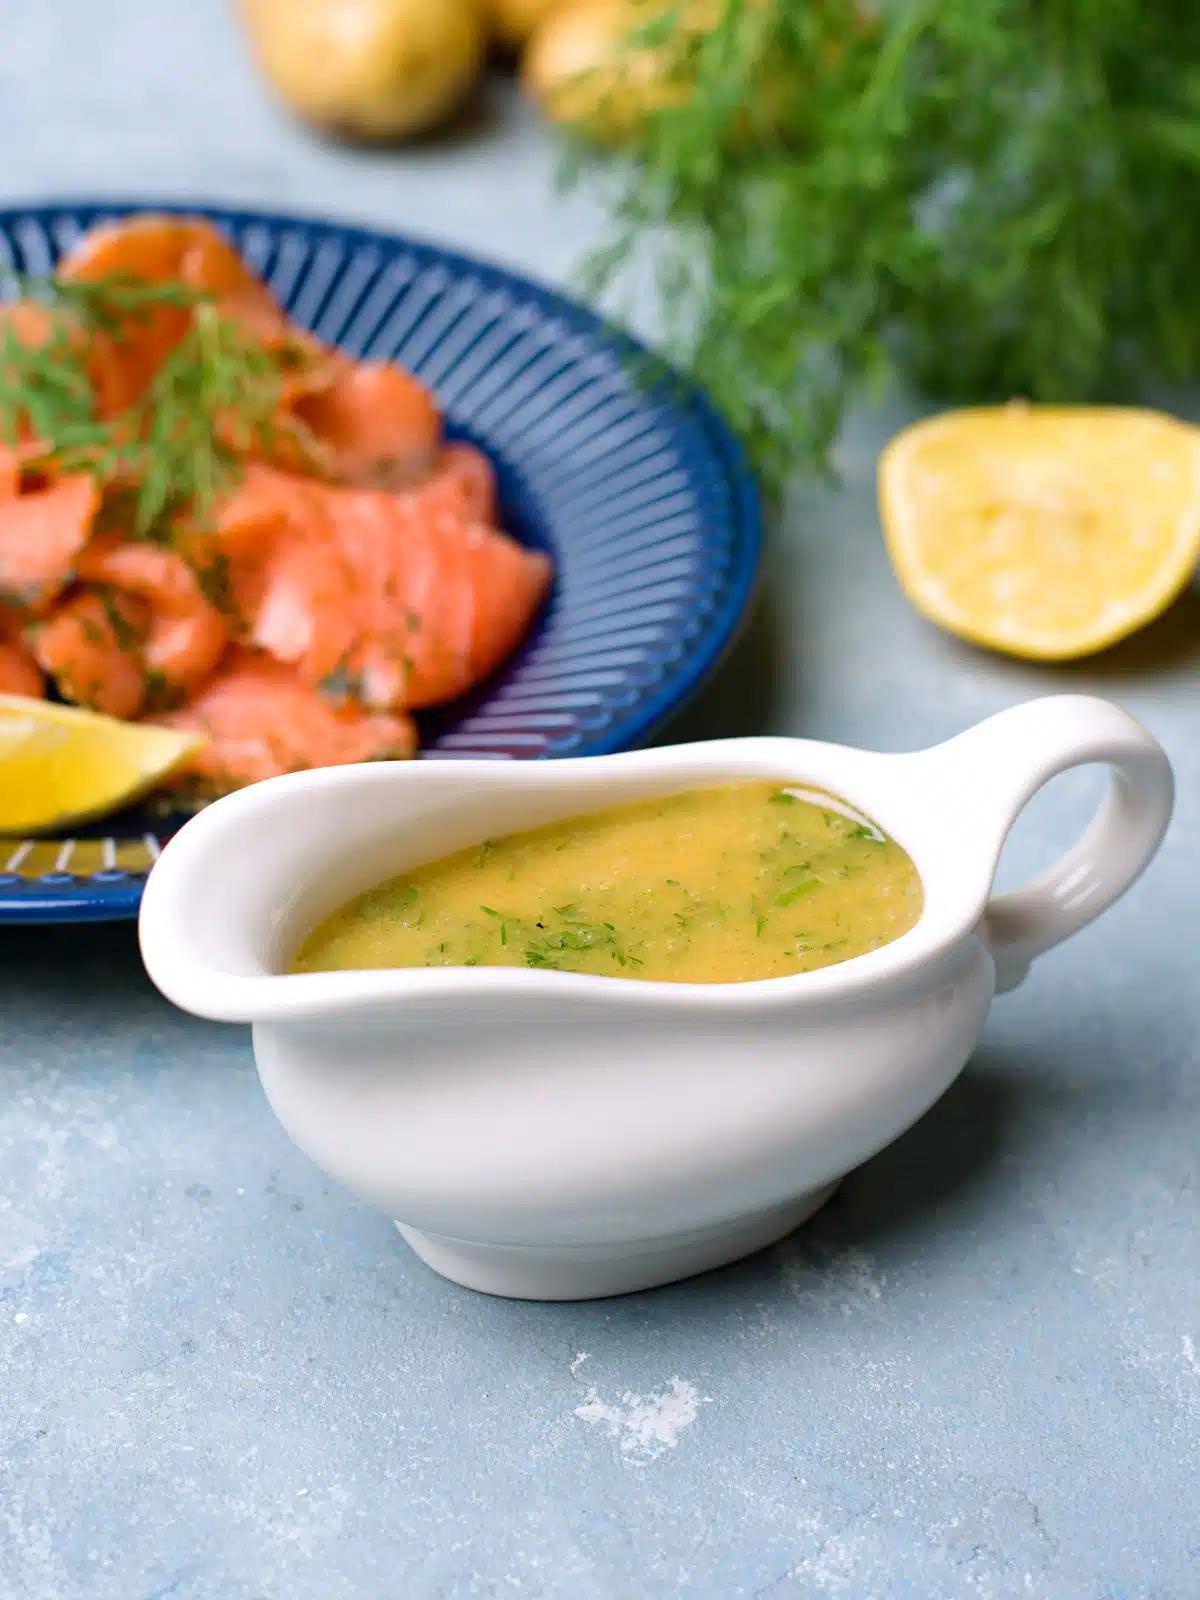 Yellowish mustard dill sauce in white pitcher with cured salmon plate in background. 